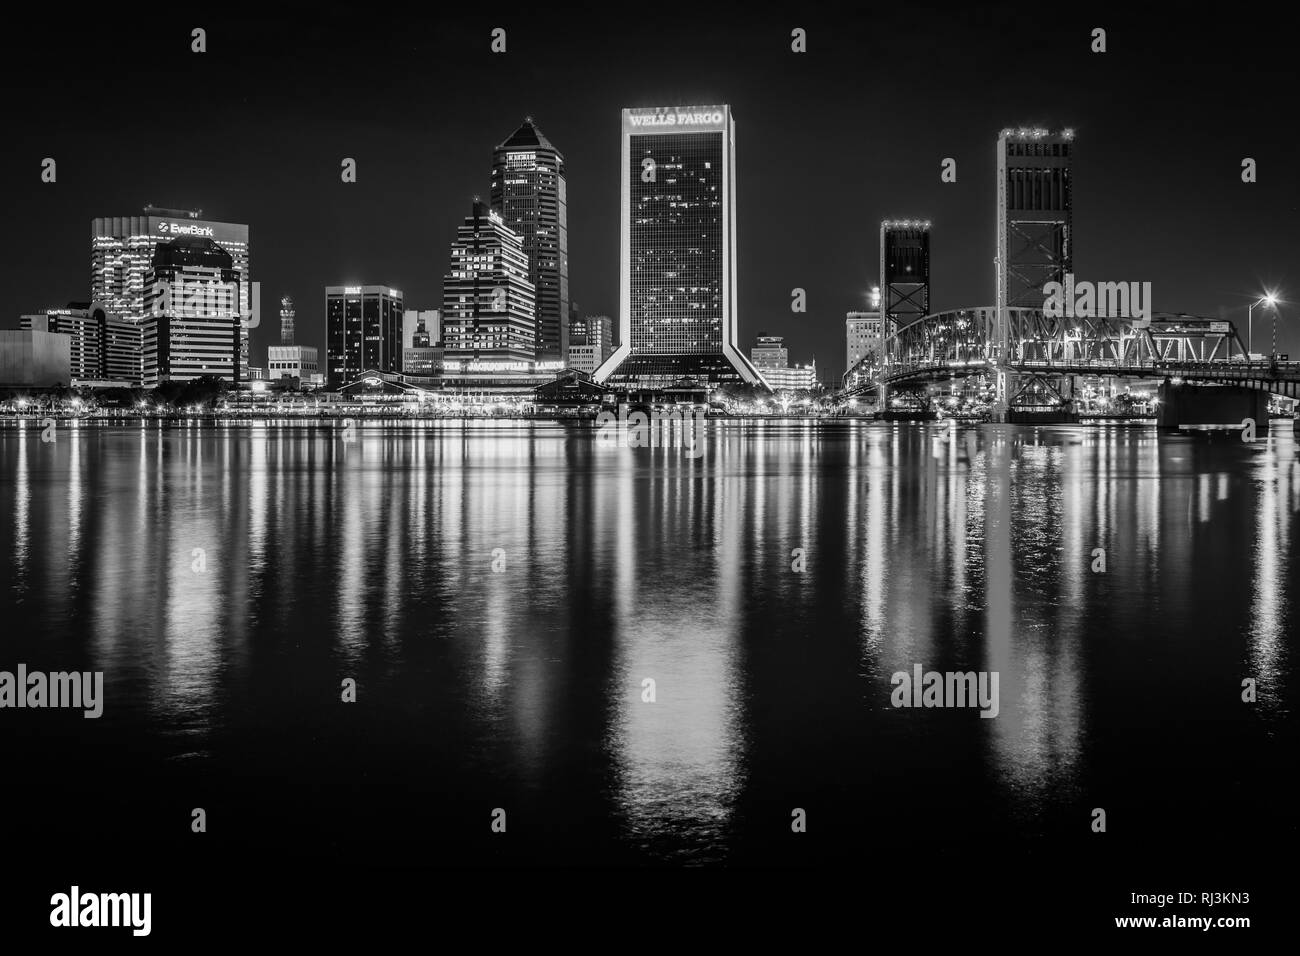 The skyline reflecting in the St. John's River at night in Jacksonvile, Florida. Stock Photo